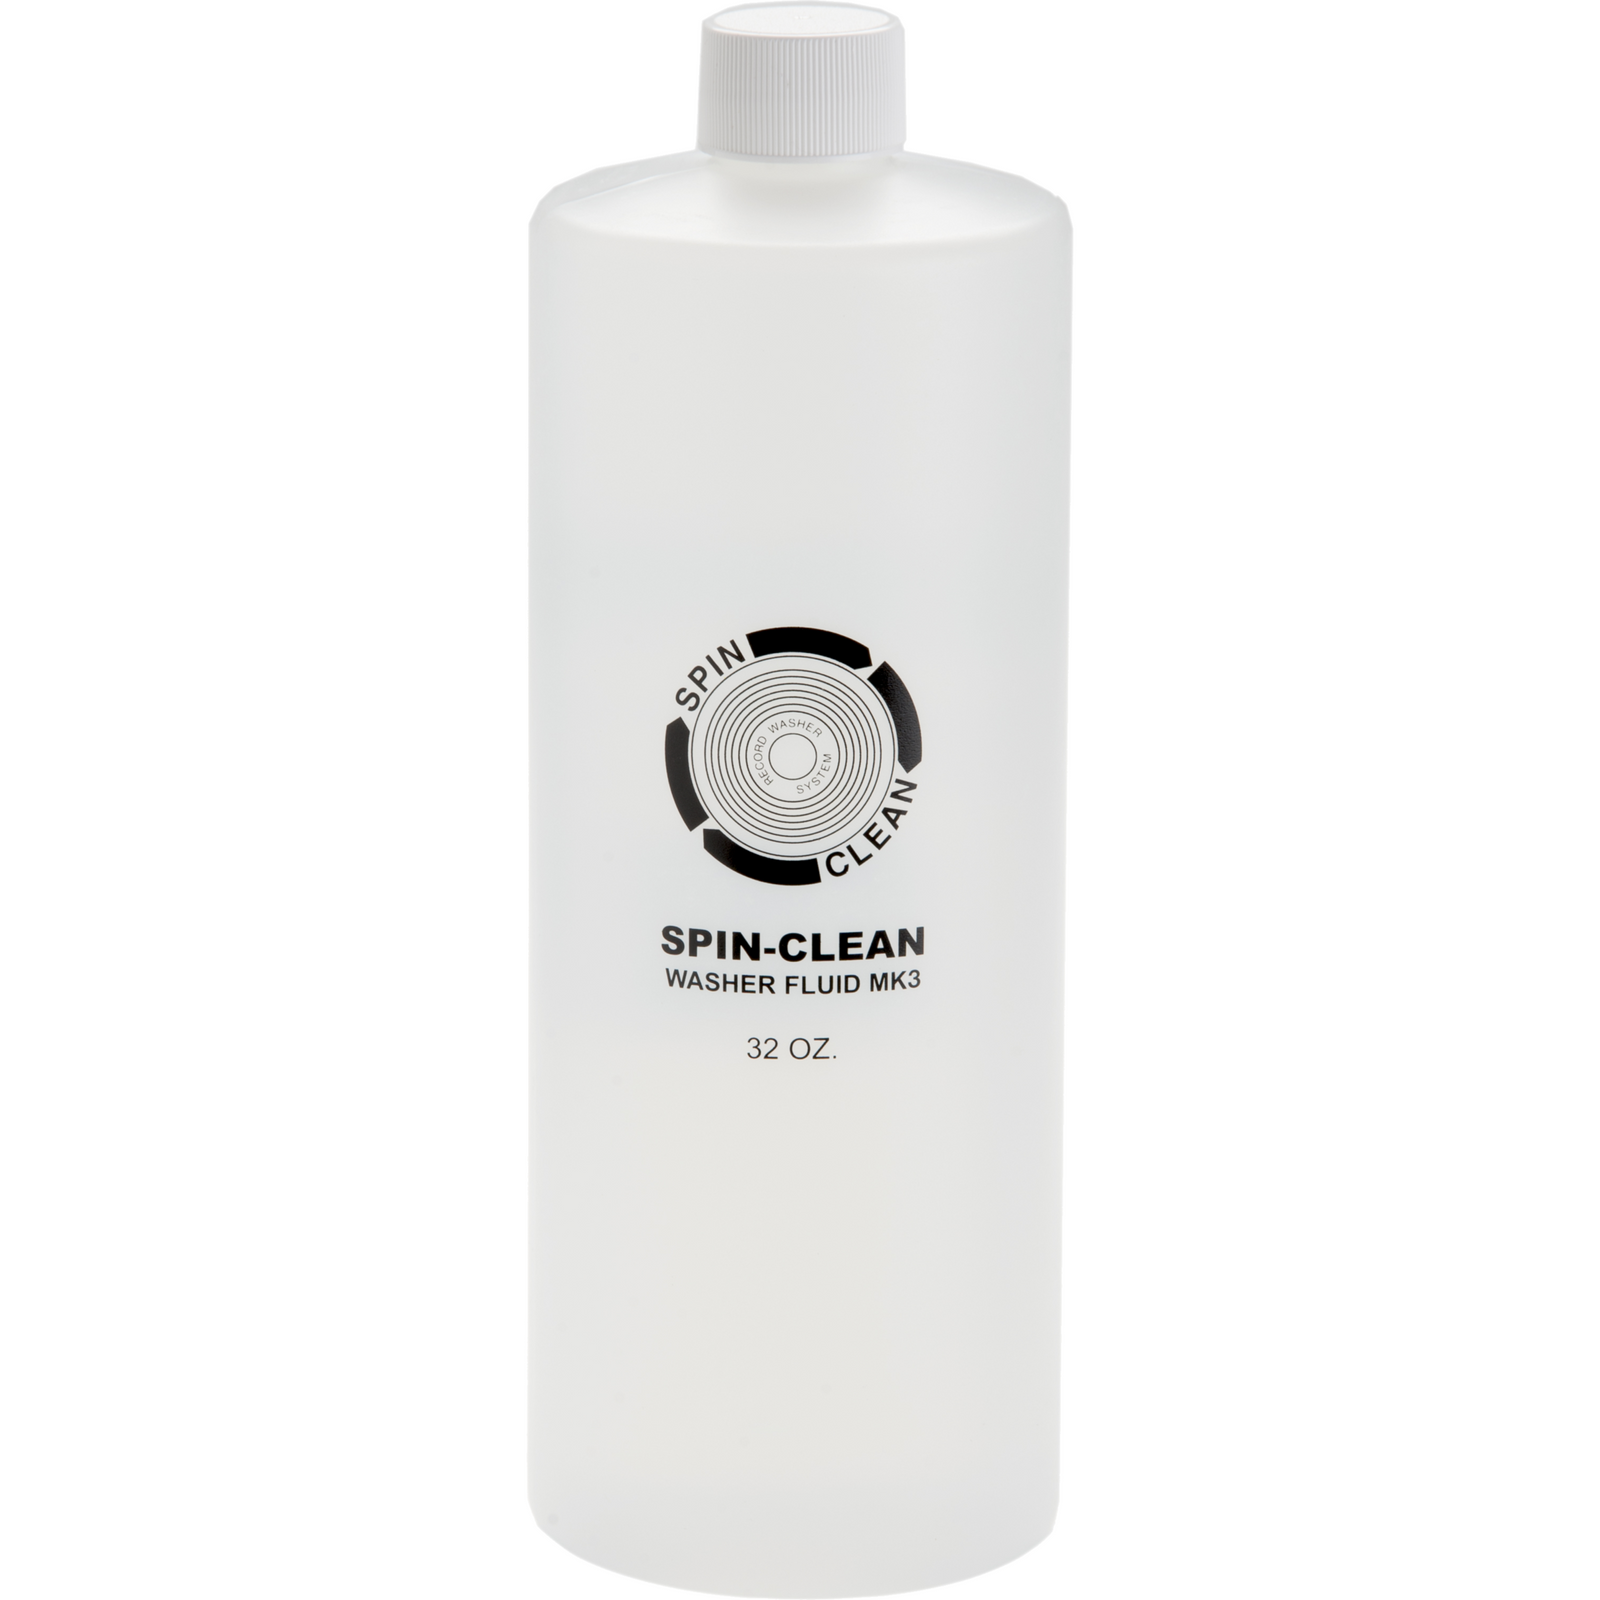 SPIN-CLEAN WASHER FLUID 32 OZ (CONCENTRATED) - Vinyl Sound - Spin Clean produces everything you need to clean and maintain your LPs. Get the best price on all Spin Clean accessories at Vinyl Sound: Spin Clean Washer Fluid - Spin Clean Discmist Optical Disc Cleaner - Spin Clean Drying Clothes - Spin Clean Rollers - Spin Clean Brushes - Spin Clean Record Washer MKII... 